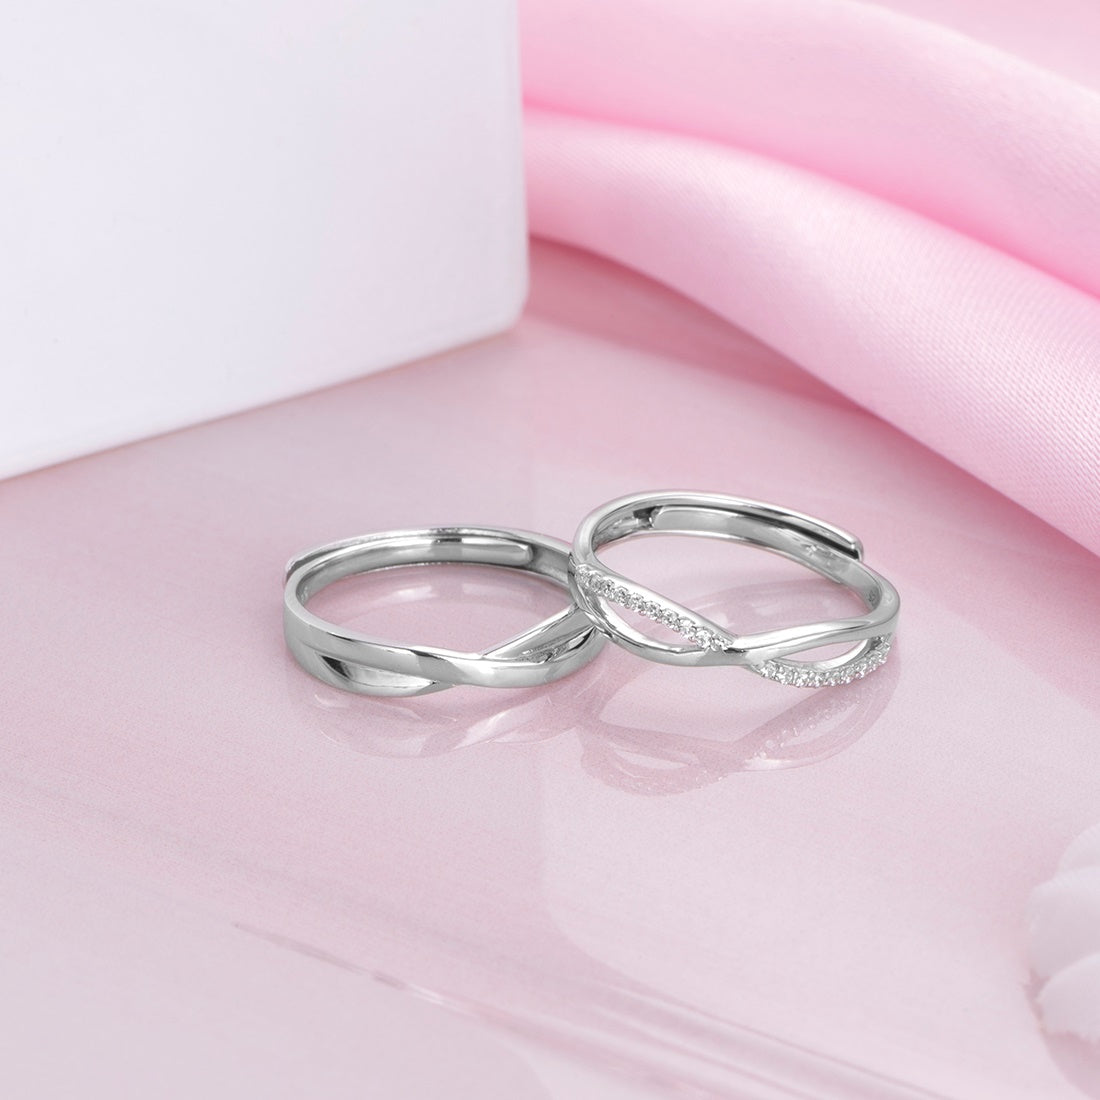 Infinity Bond Rhodium-Plated 925 Sterling Silver Ring (Adjustable)